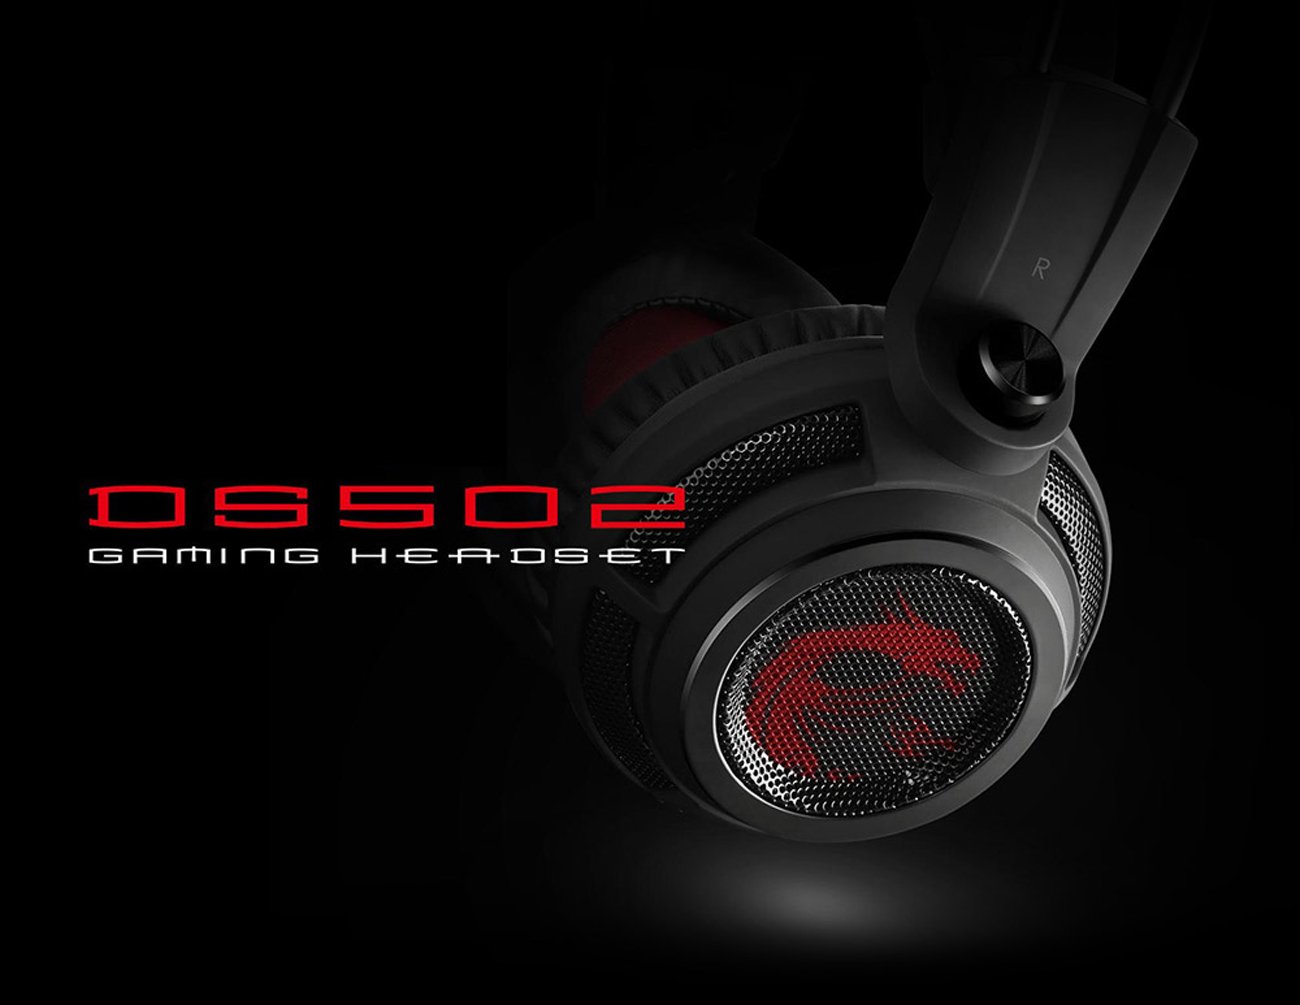 MSI Gaming Headset-DS502